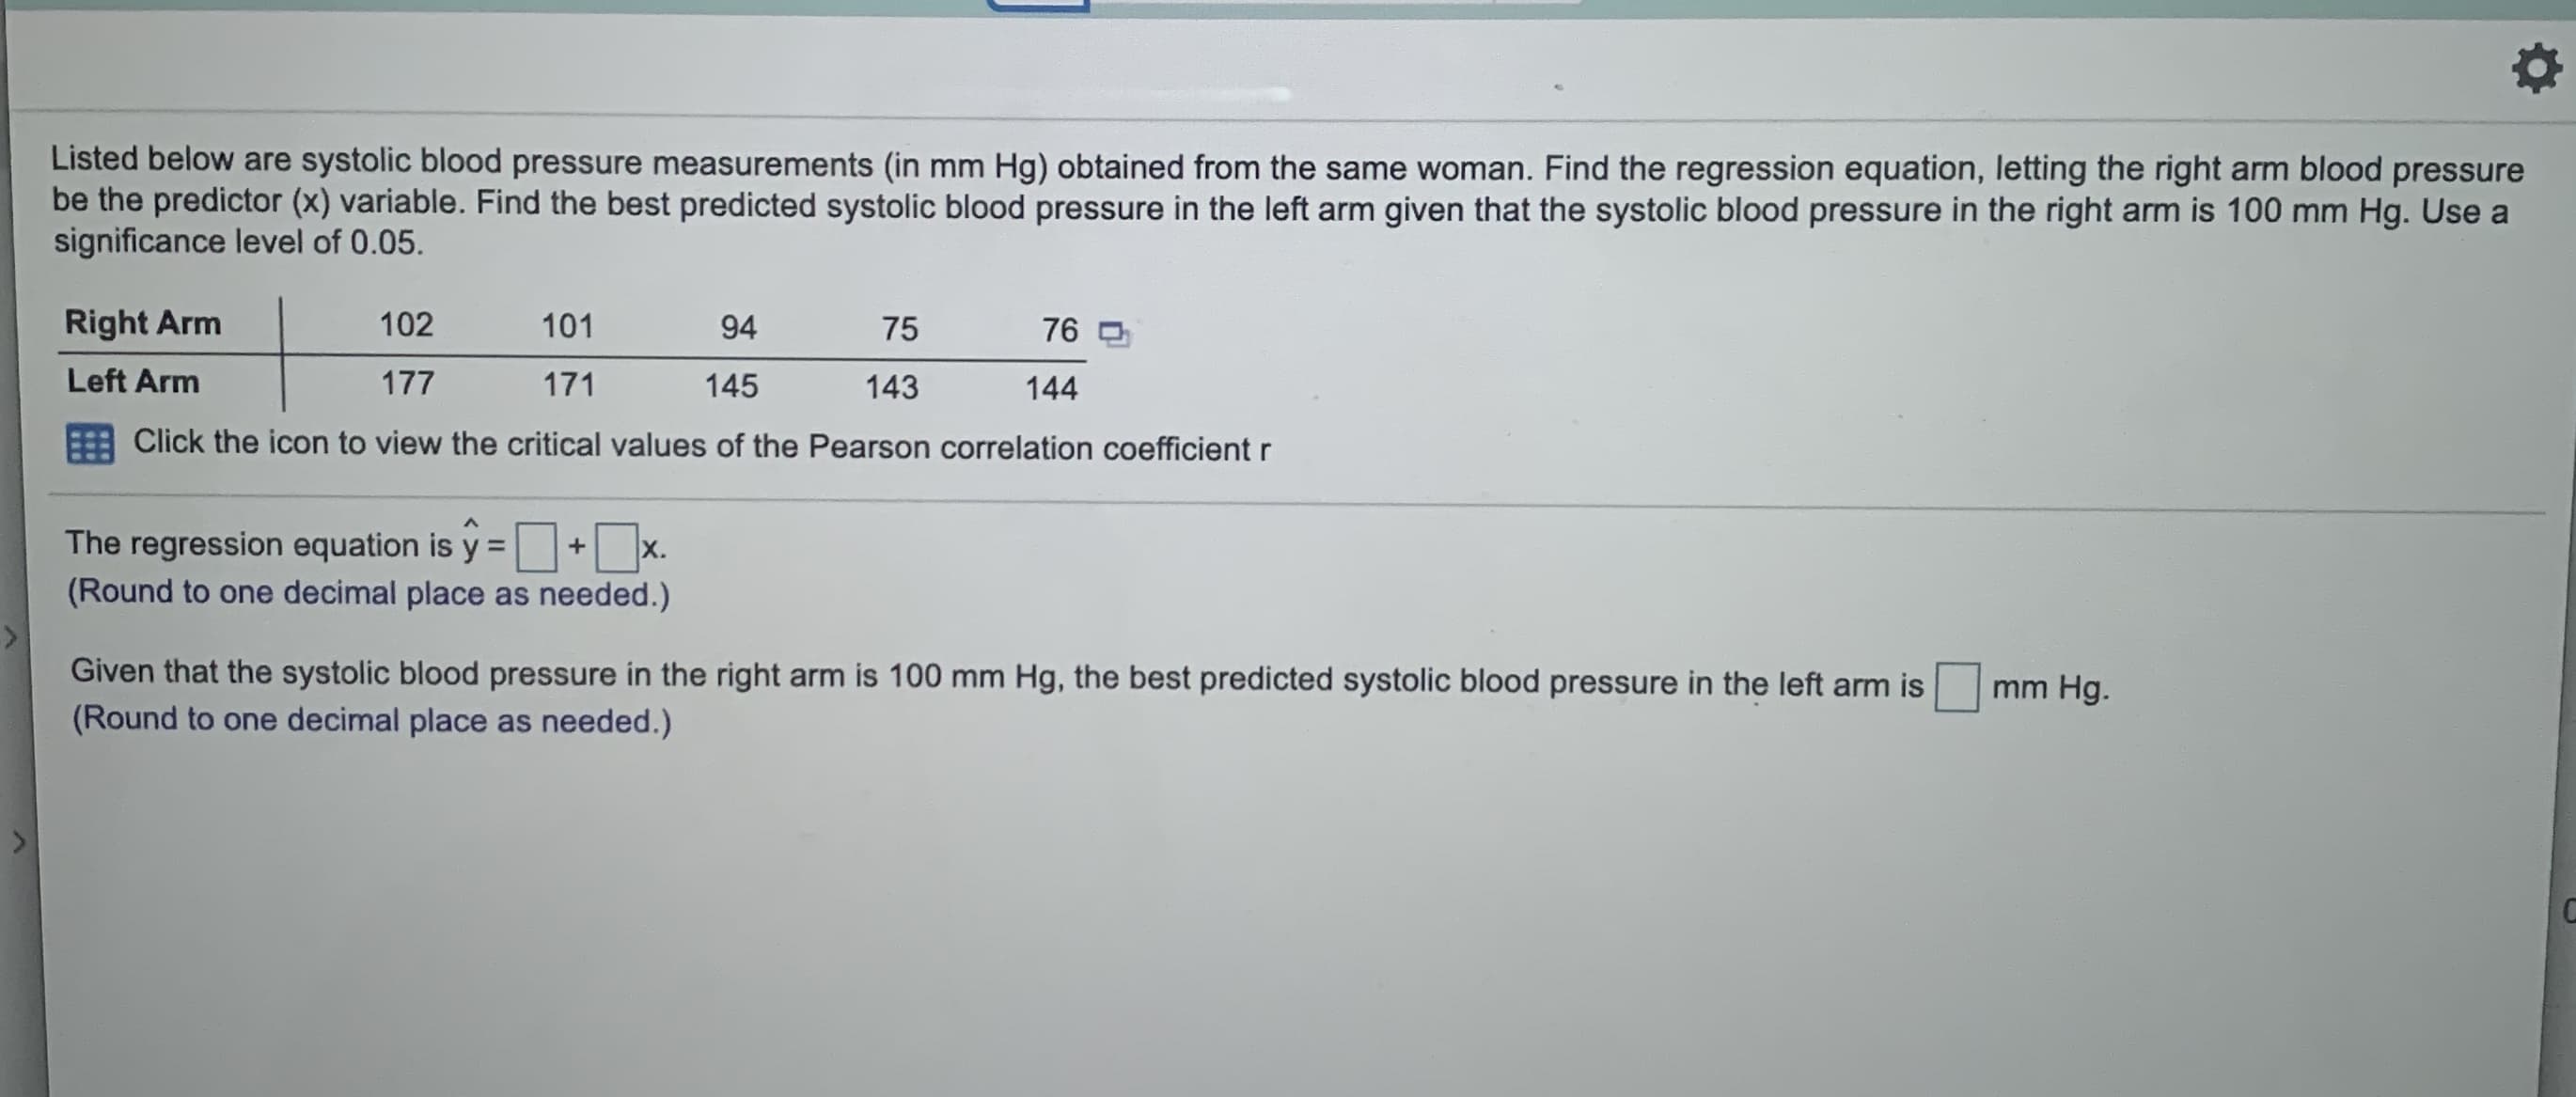 Listed below are systolic blood pressure measurements (in mm Hg) obtained from the same woman. Find the regression equation, letting the right arm blood pressure
be the predictor (x) variable. Find the best predicted systolic blood pressure in the left arm given that the systolic blood pressure in the right arm is 100 mm Hg. Use a
significance level of 0.05.
Right Arm
102
101
94
75
76
Left Arm
177
171
145
143
144
Click the icon to view the critical values of the Pearson correlation coefficient r
The regression equation is y =+ x.
(Round to one decimal place as needed.)
Given that the systolic blood pressure in the right arm is 100 mm Hg, the best predicted systolic blood pressure in the left arm is
(Round to one decimal place as needed.)
mm Hg.
